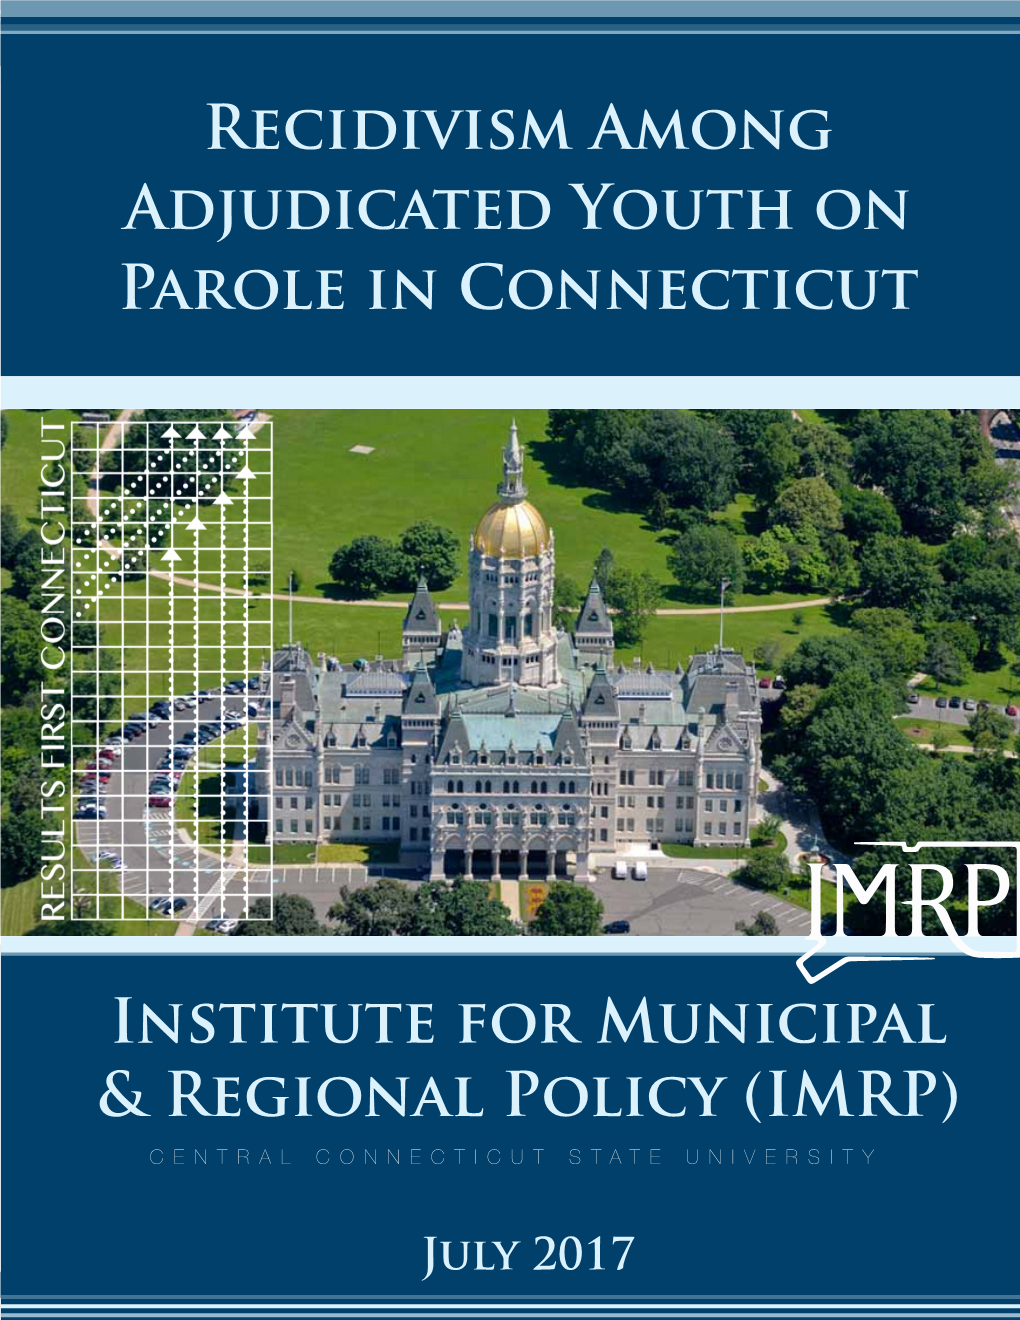 Recidivism Among Adjudicated Youth on Parole in Connecticut